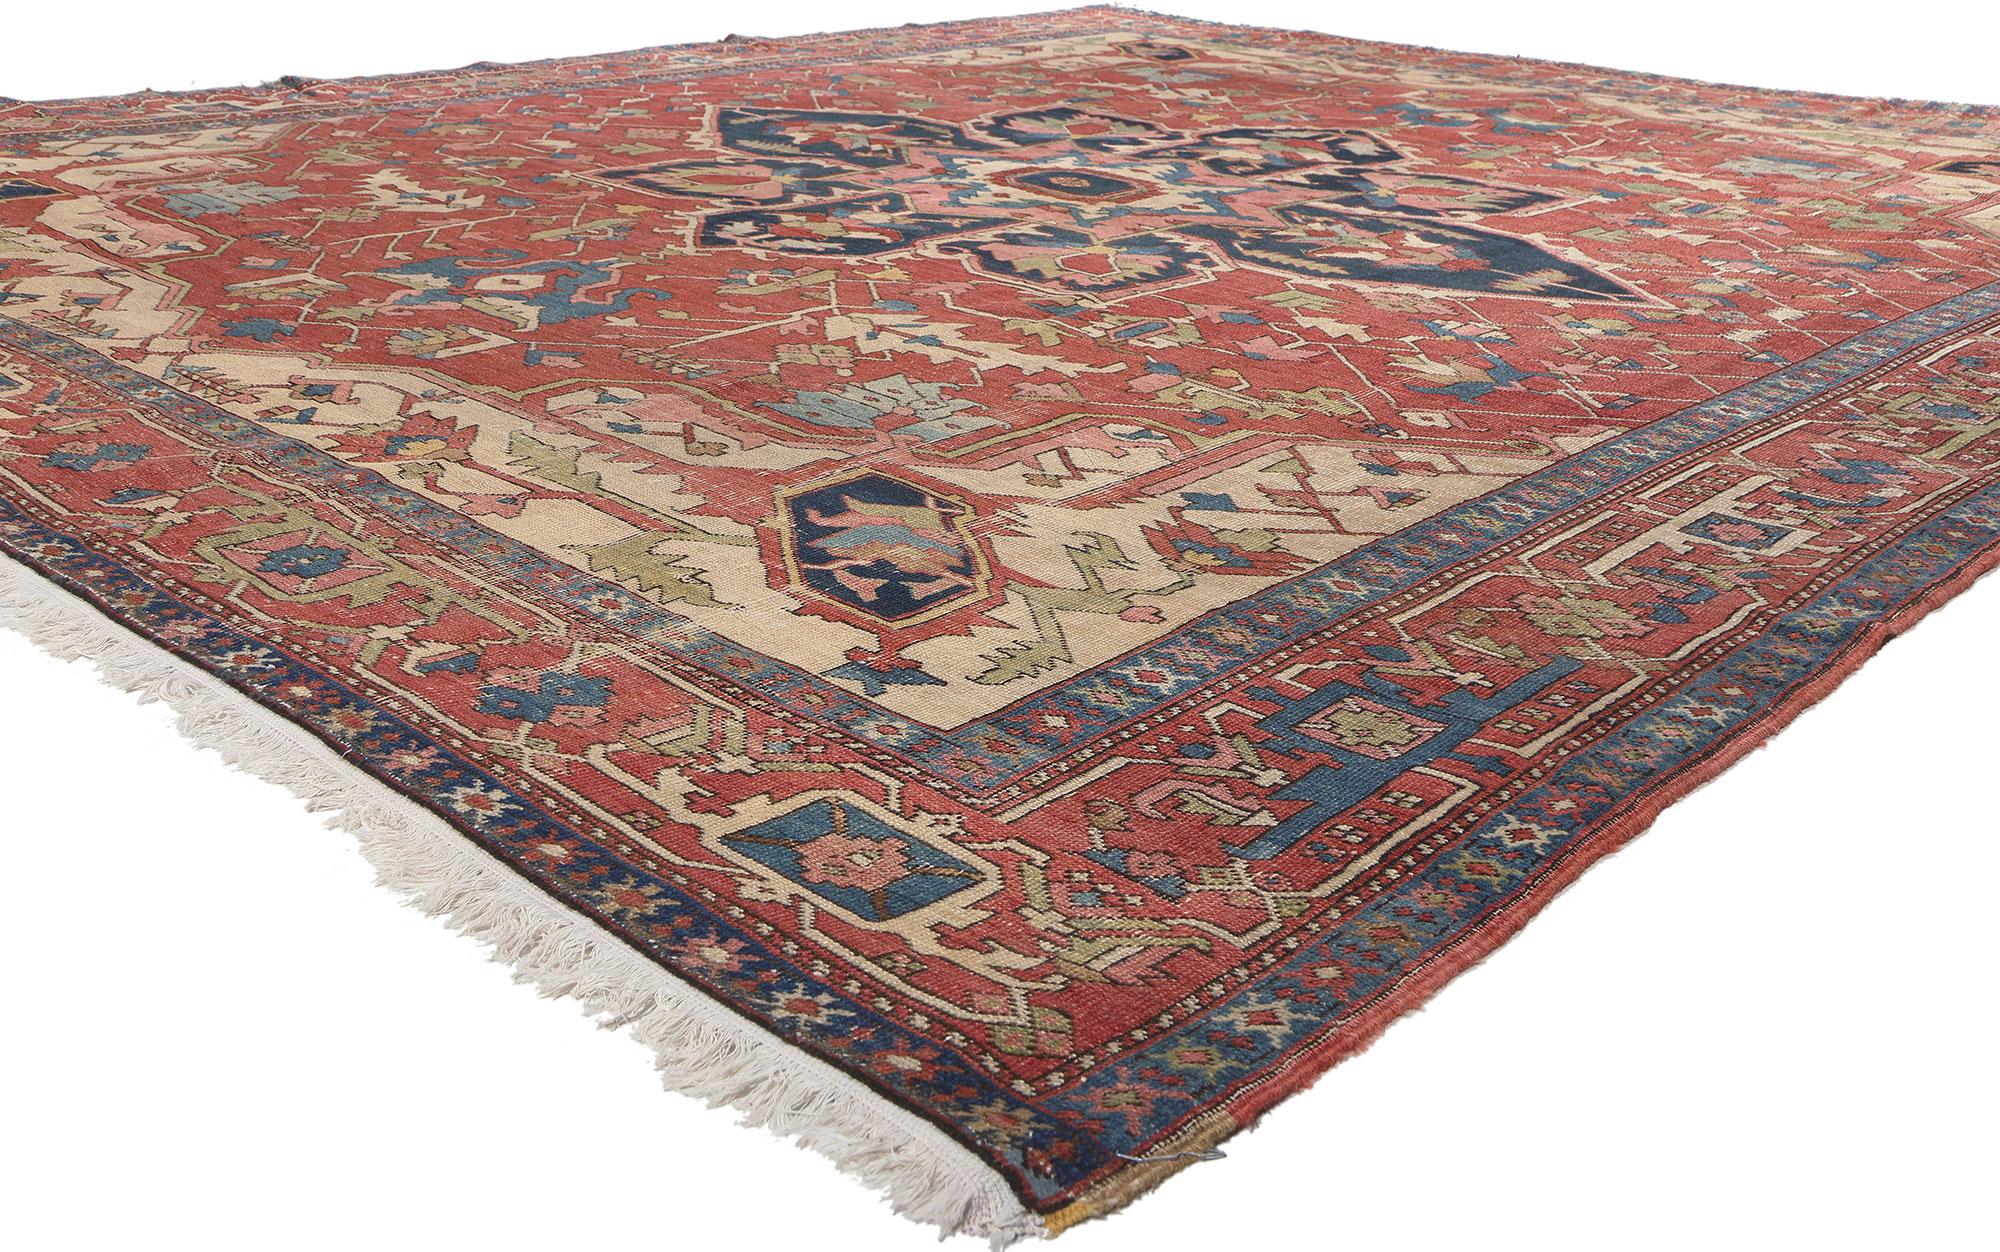 78671 Antique-Worn Persian Serapi Rug, 10'01 x 11'08. Serapi rugs, crafted in the village of Serab of northwestern Iran, are renowned for their distinctive features. These Persian rugs are characterized by geometric patterns, nature-inspired colors,